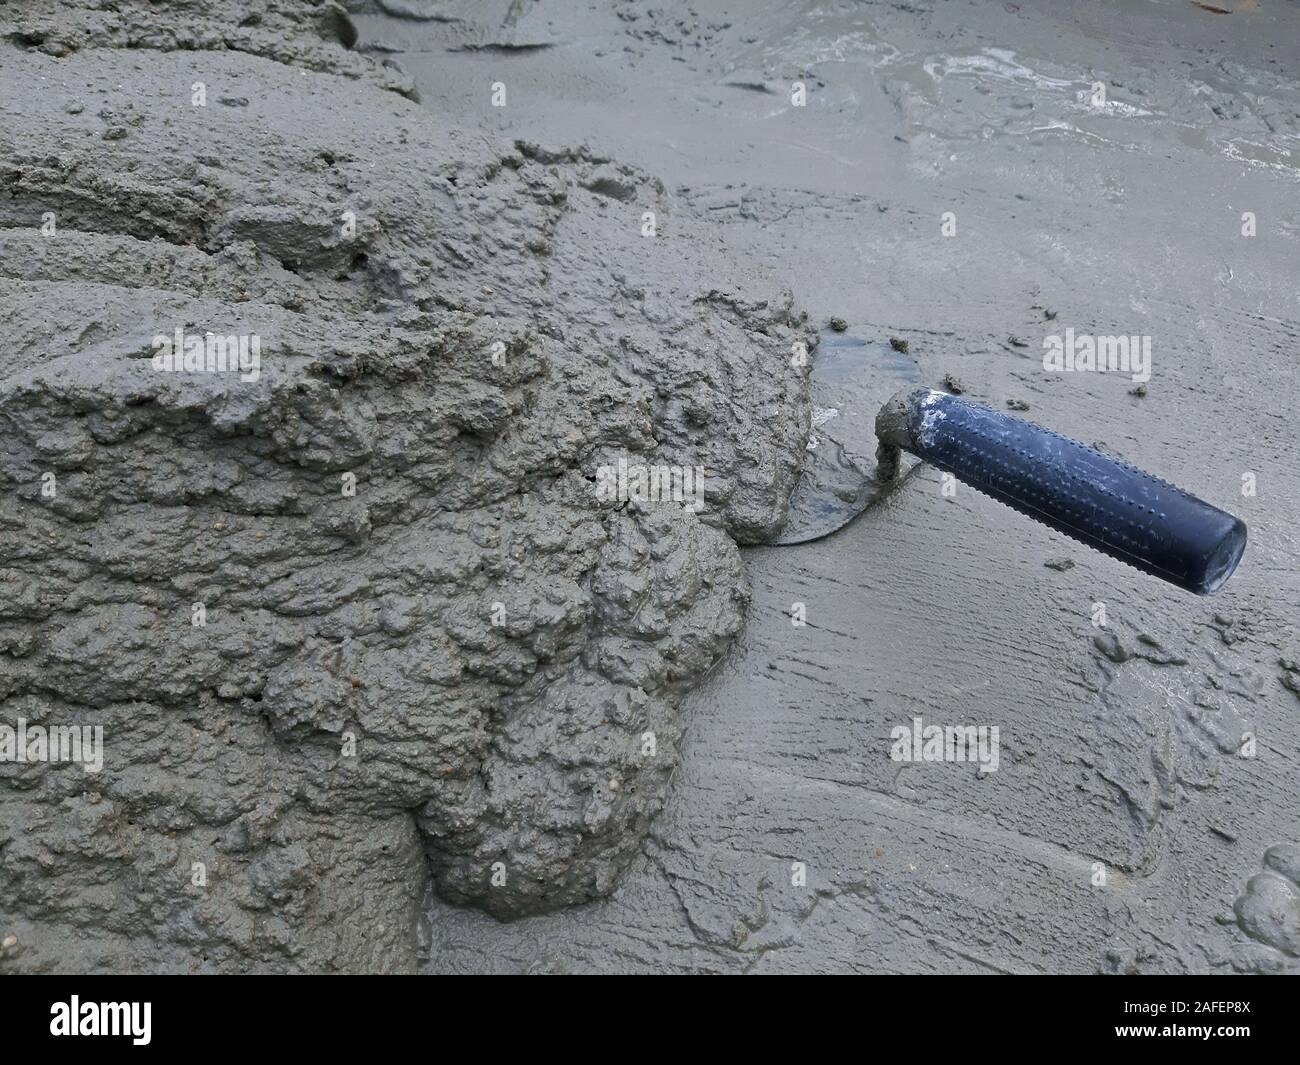 Trowel and mortar for plastering. Construction concept Stock Photo